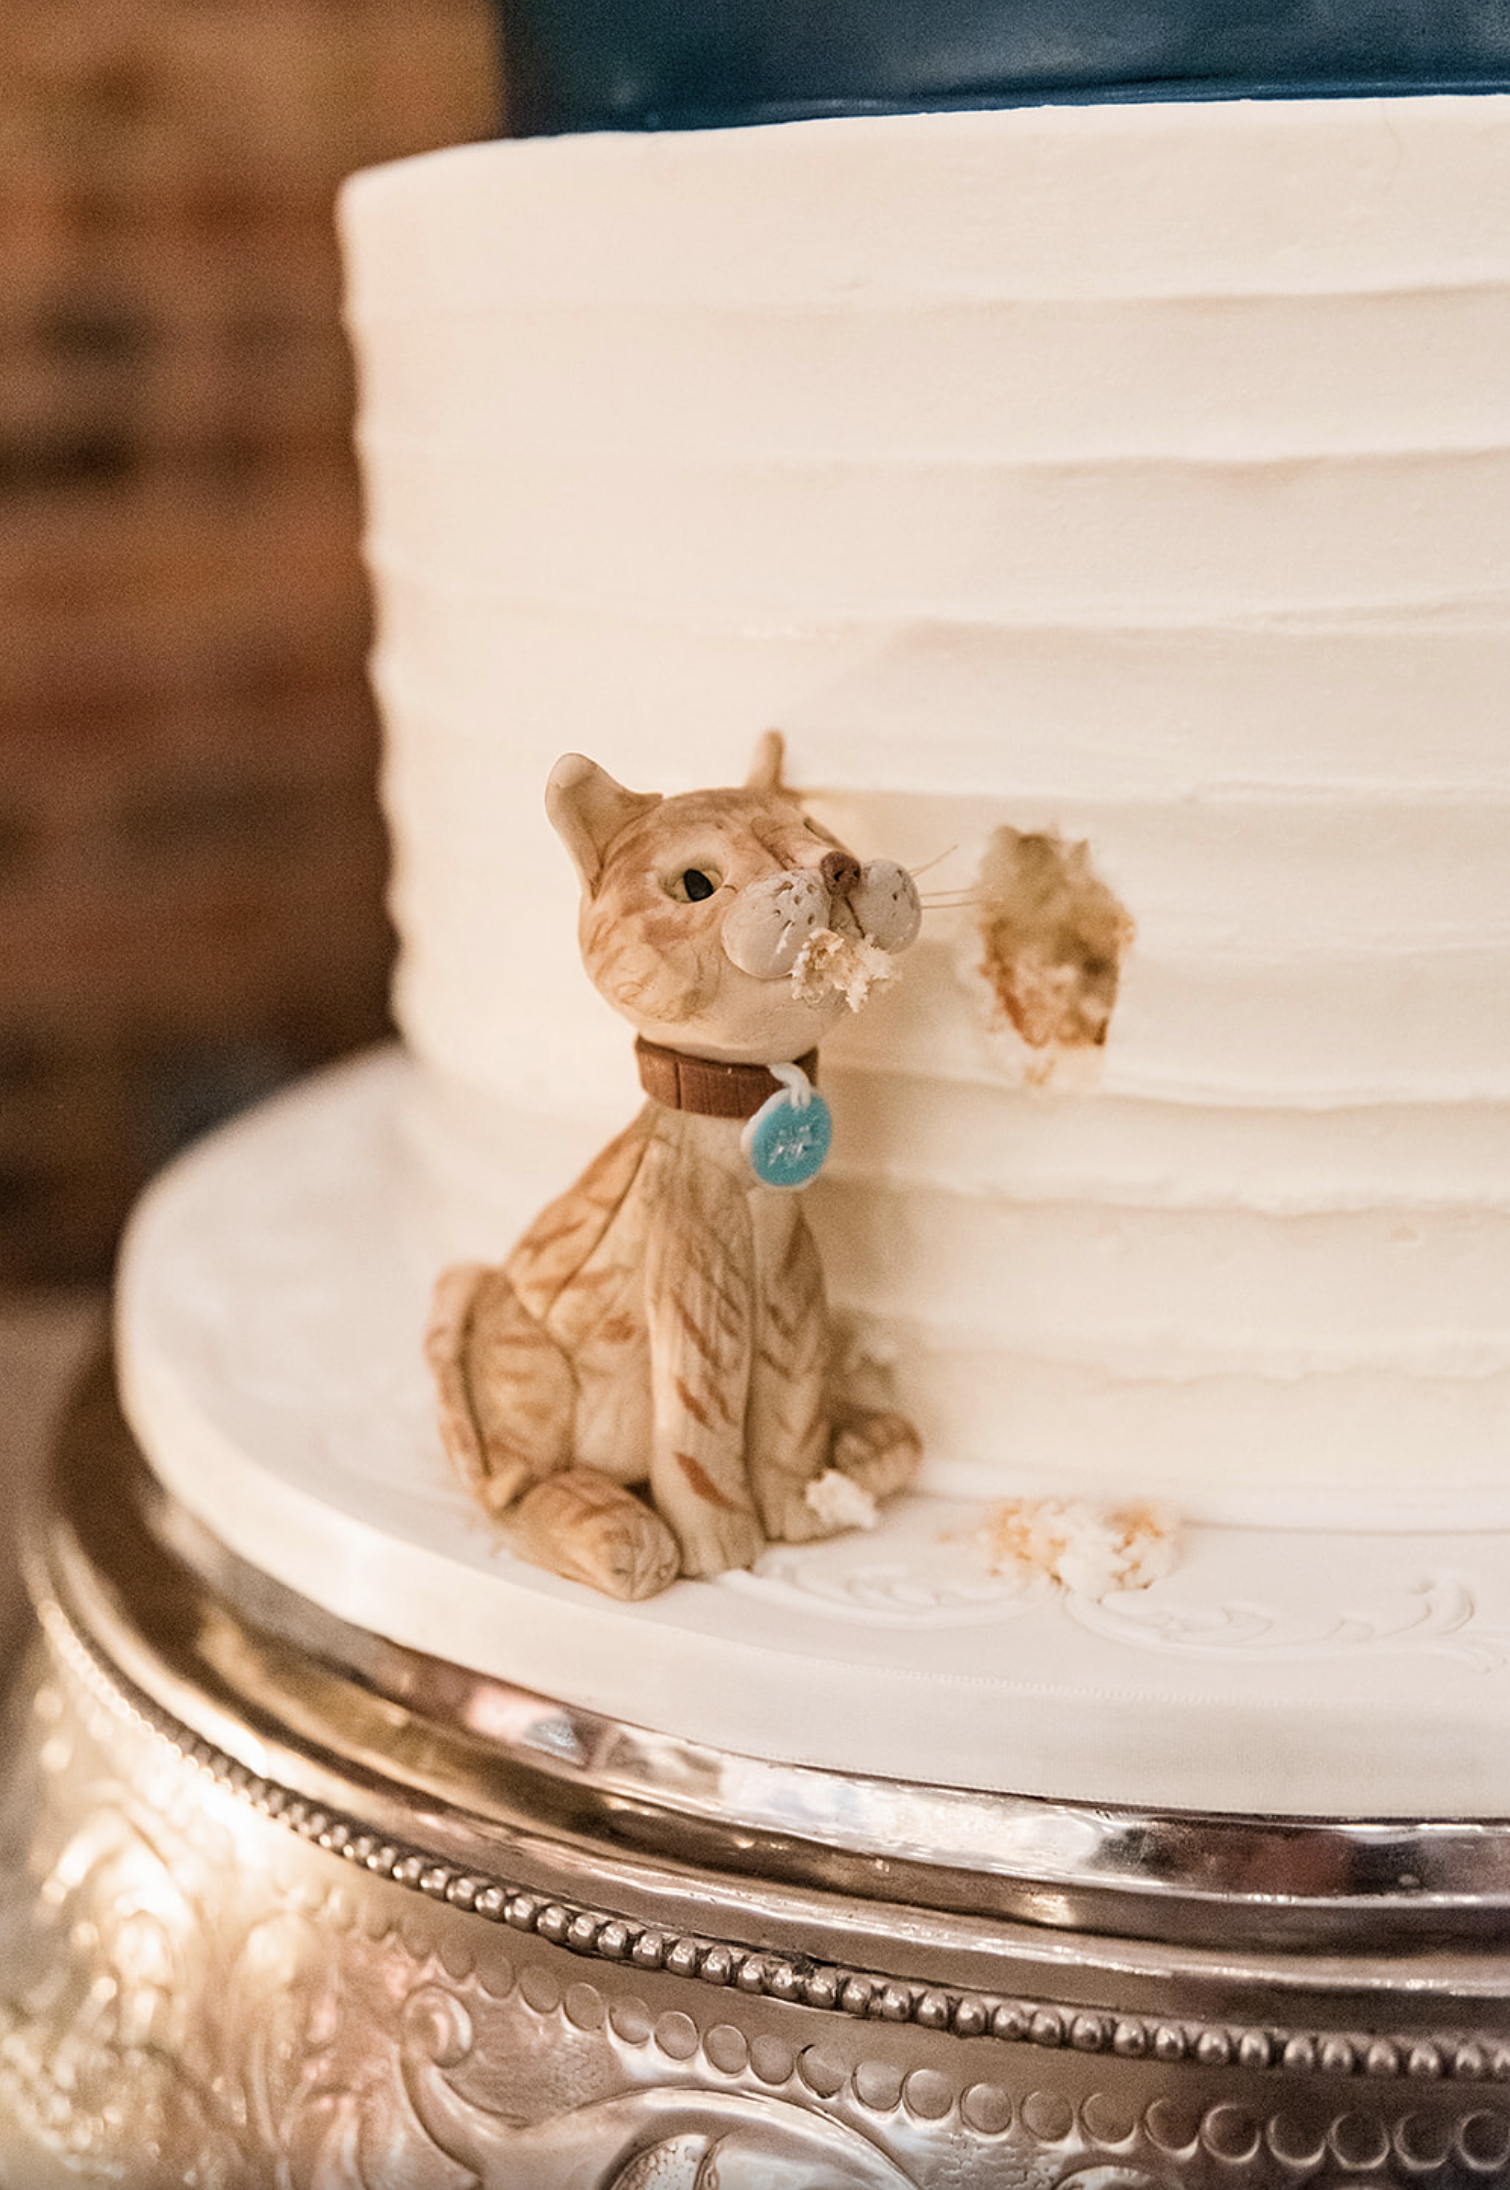 A mini cat figure is placed next to the base of the cake. It looks like the cat is eating some of the cake.